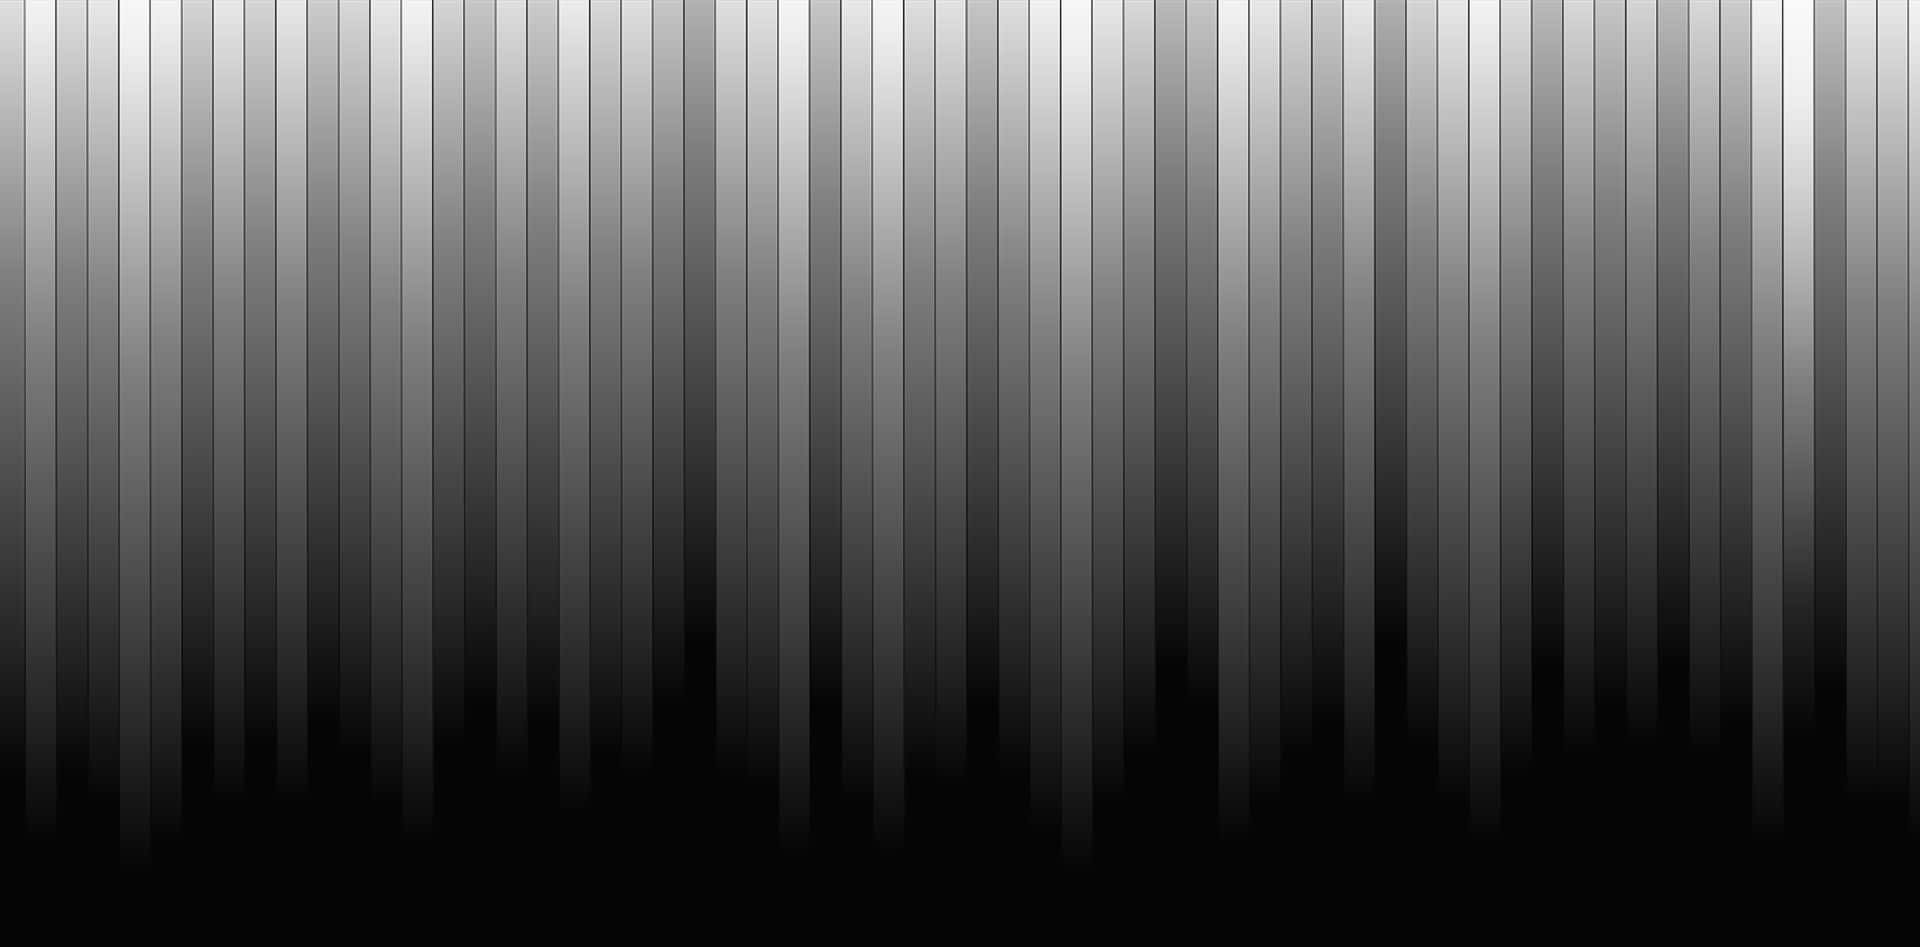 Fading Black And White Stripes Wallpaper